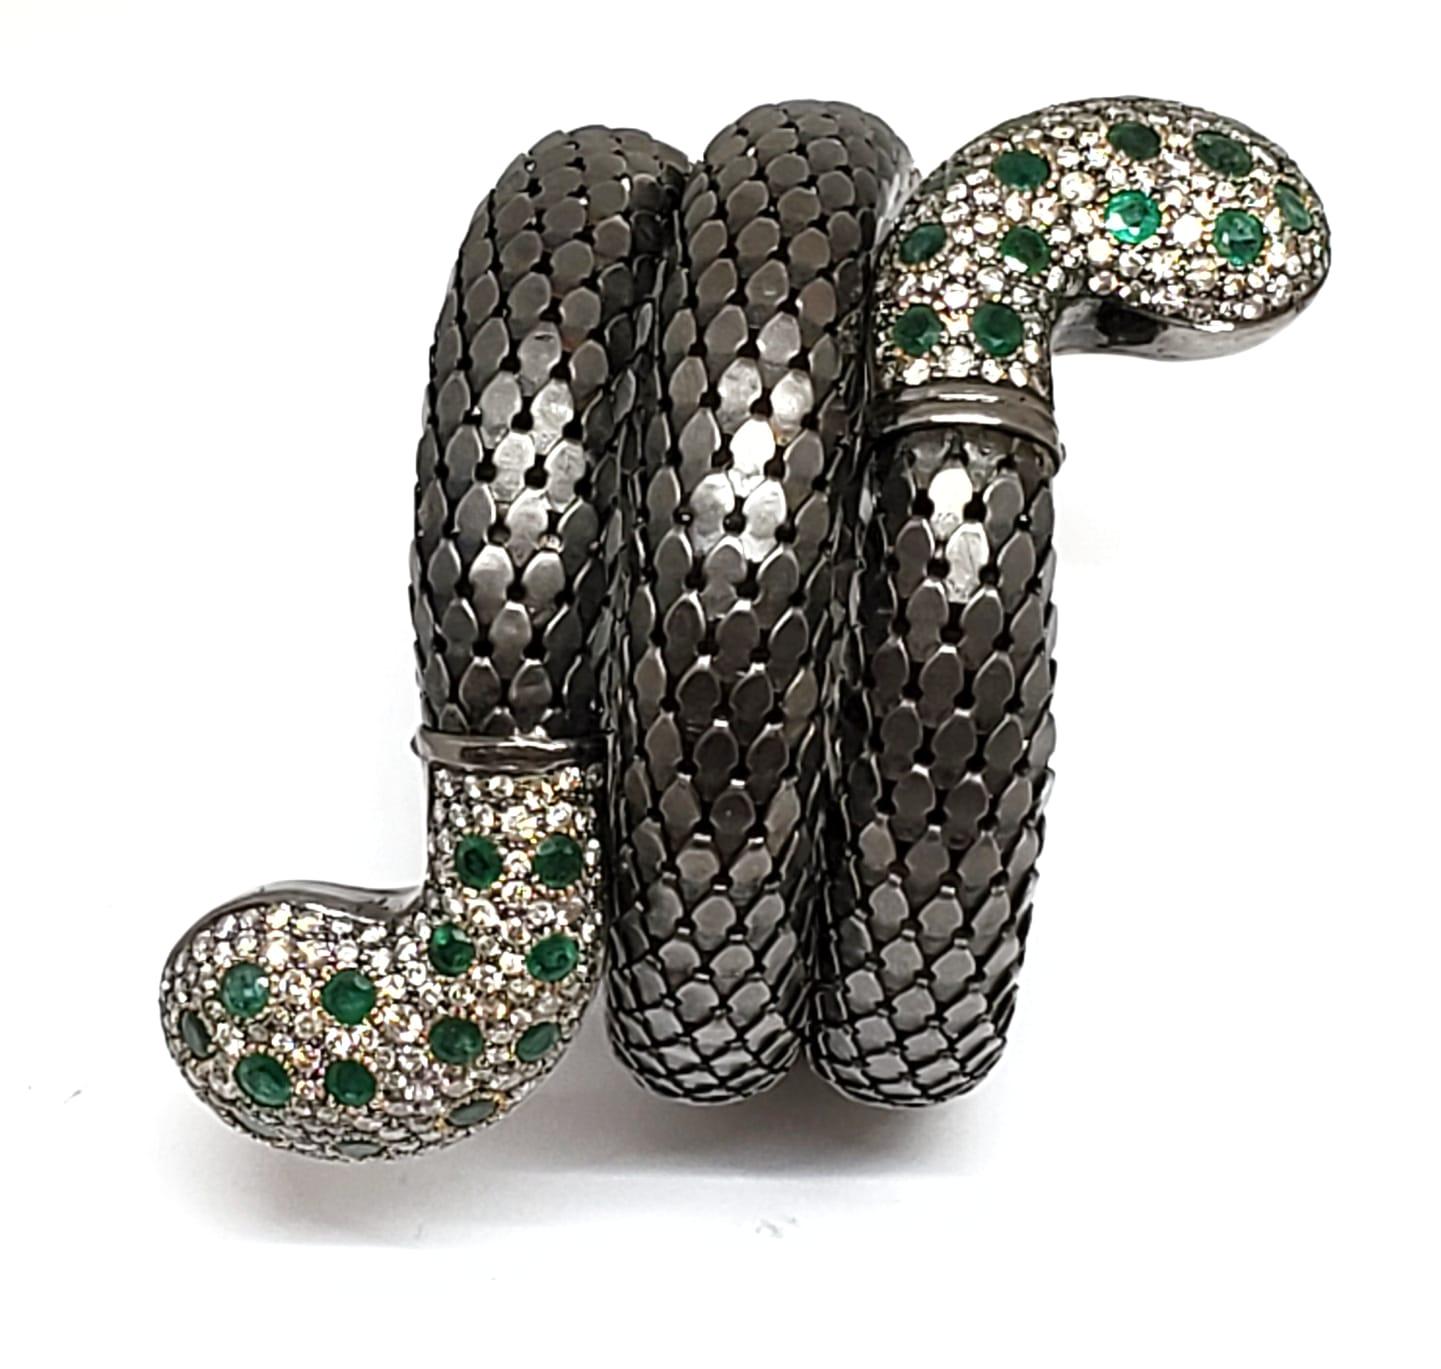 Andreoli Diamond Emerald 18 Karat Gold and Silver Serpent Bracelet

This bracelet features:
- 8.61 Carat Diamond
- 6.25 Carat Emerald
- 5.00 Gram 18K Gold
- 77.79 Gram Silver
- Made In Italy